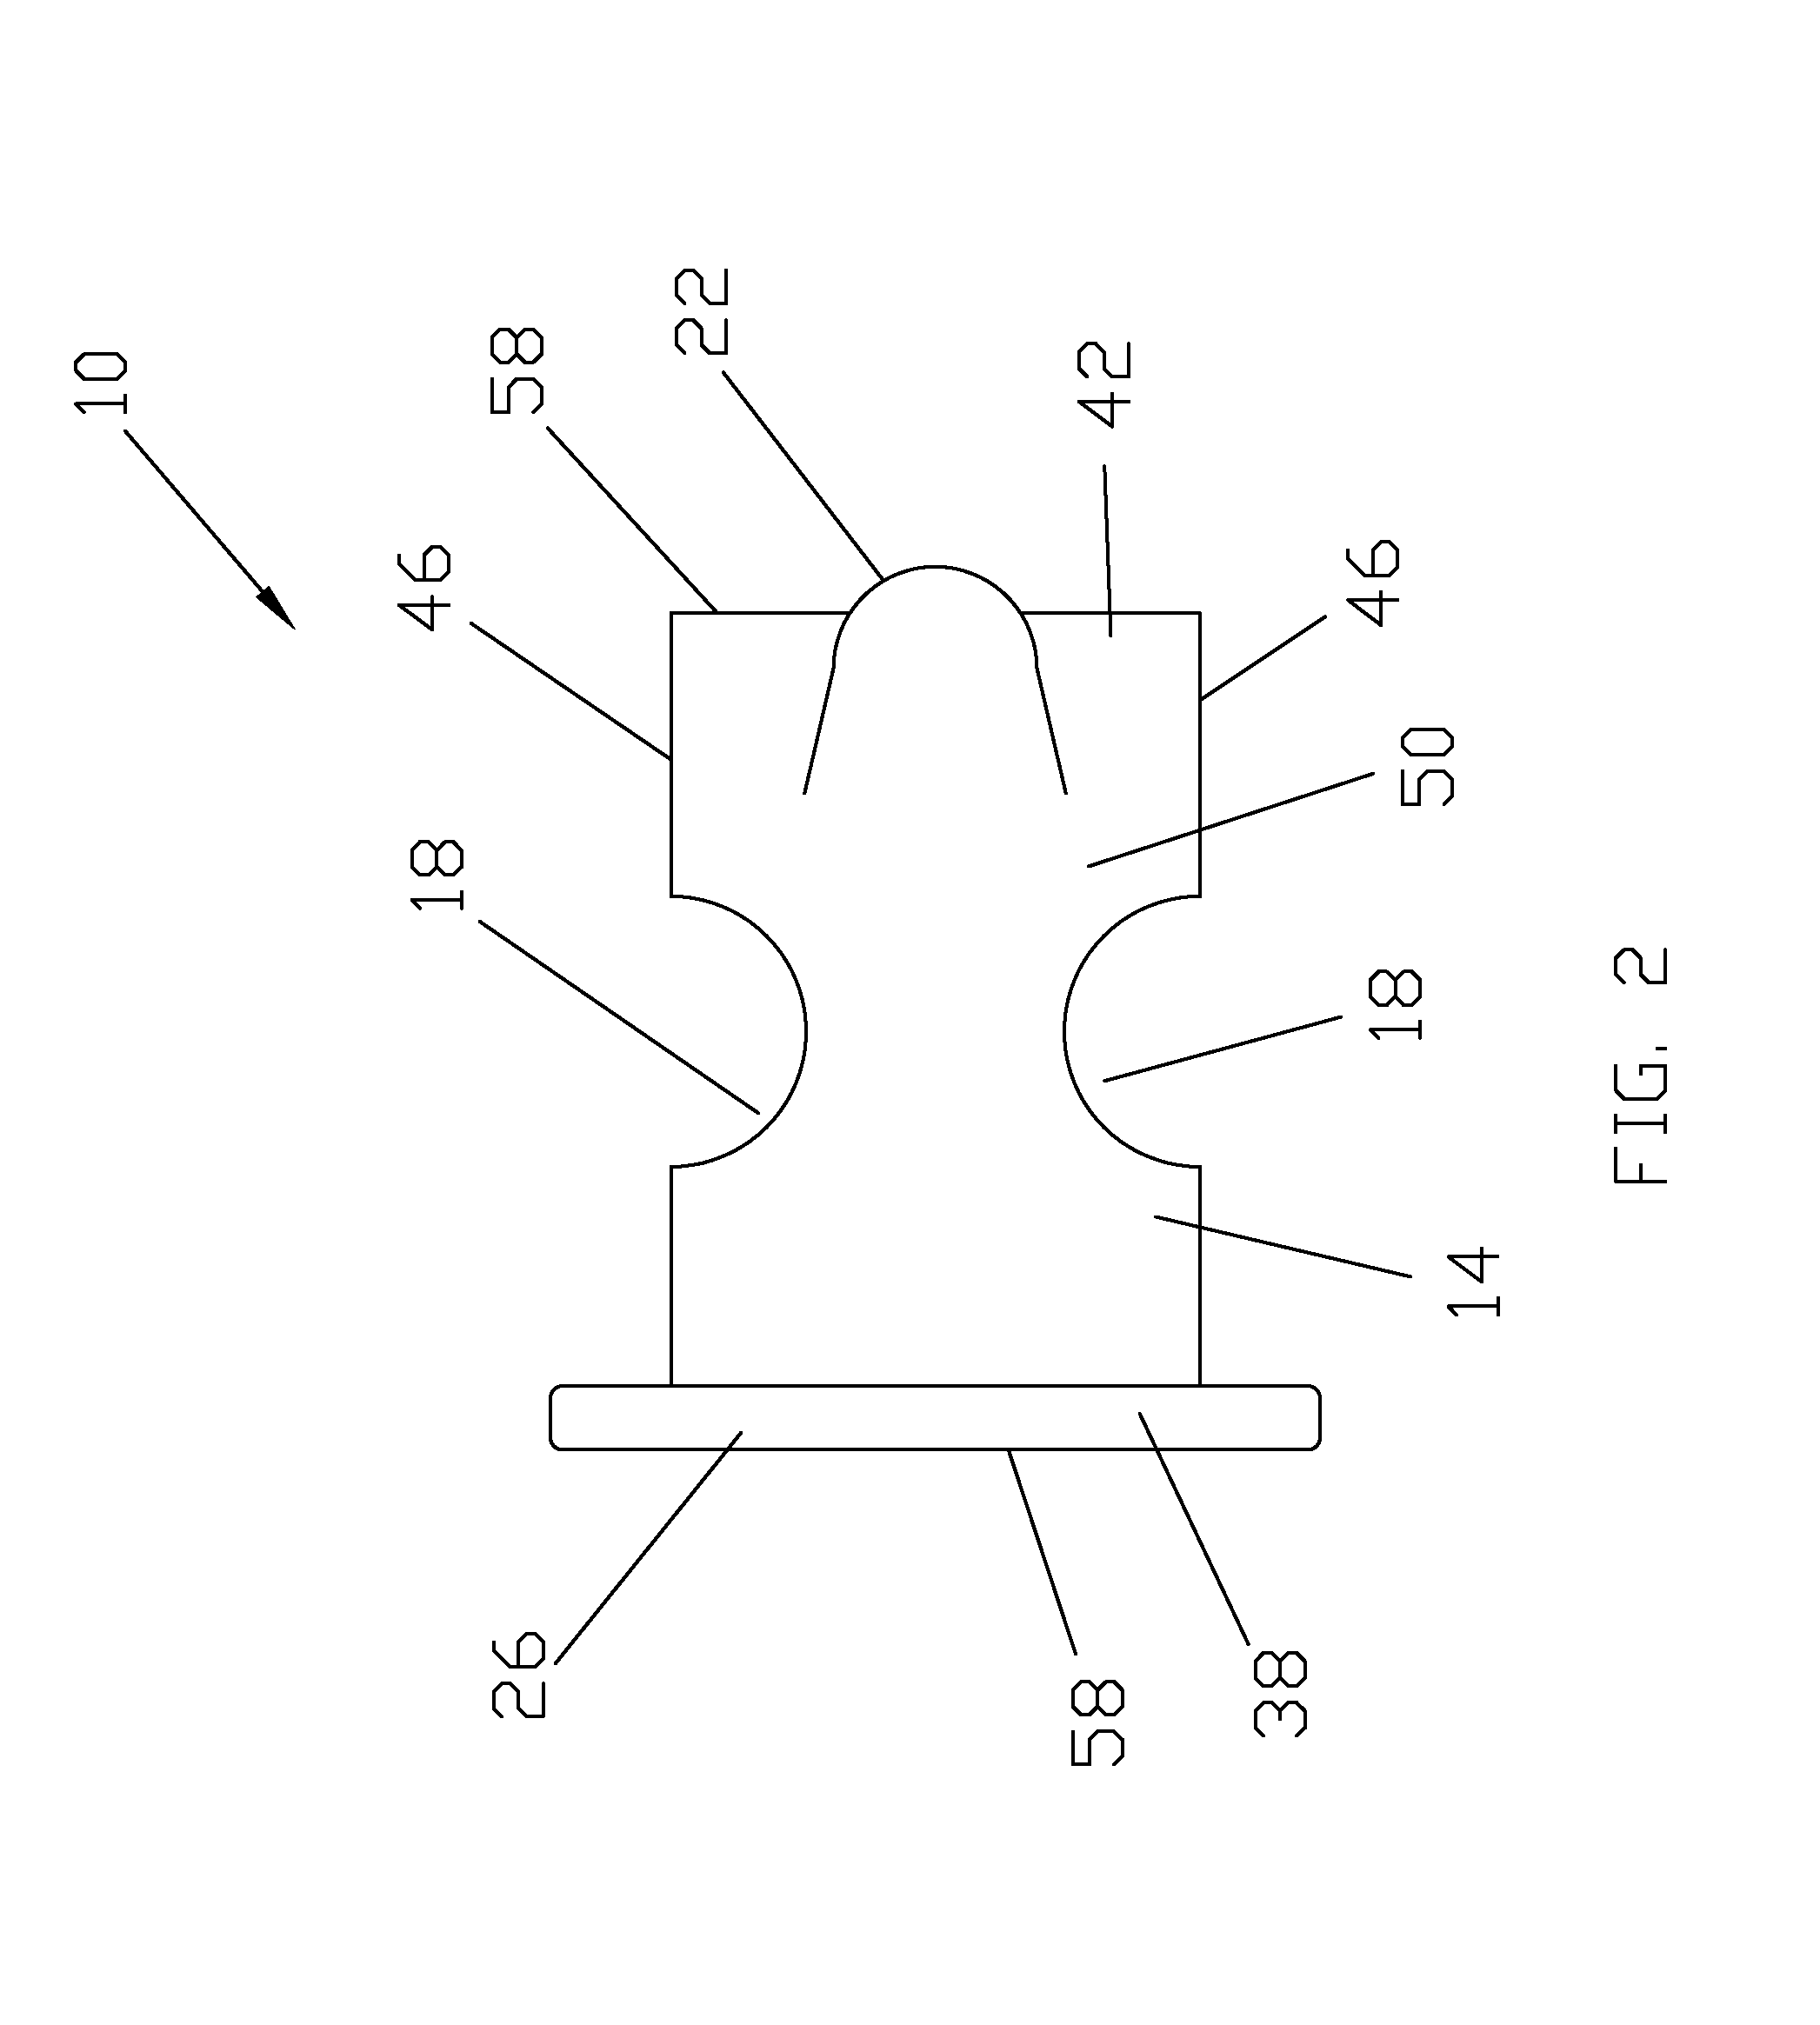 Rope halter apparatus and method of use